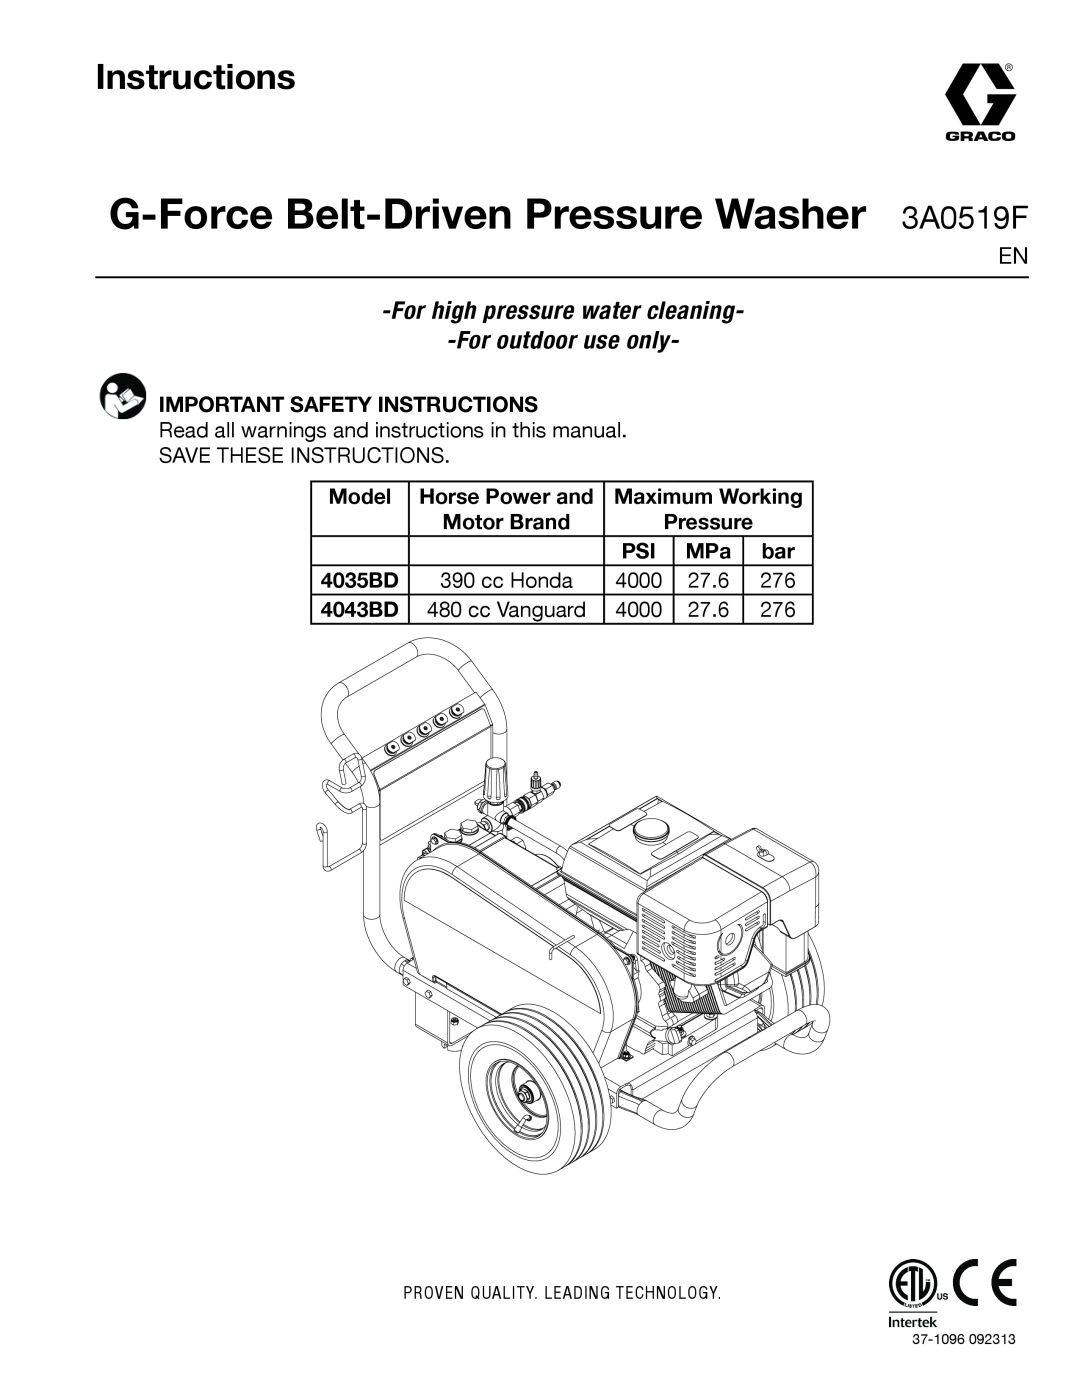 Graco 4035BD, 4043BD important safety instructions G-Force Belt-Driven Pressure Washer 3A0519F, Instructions 